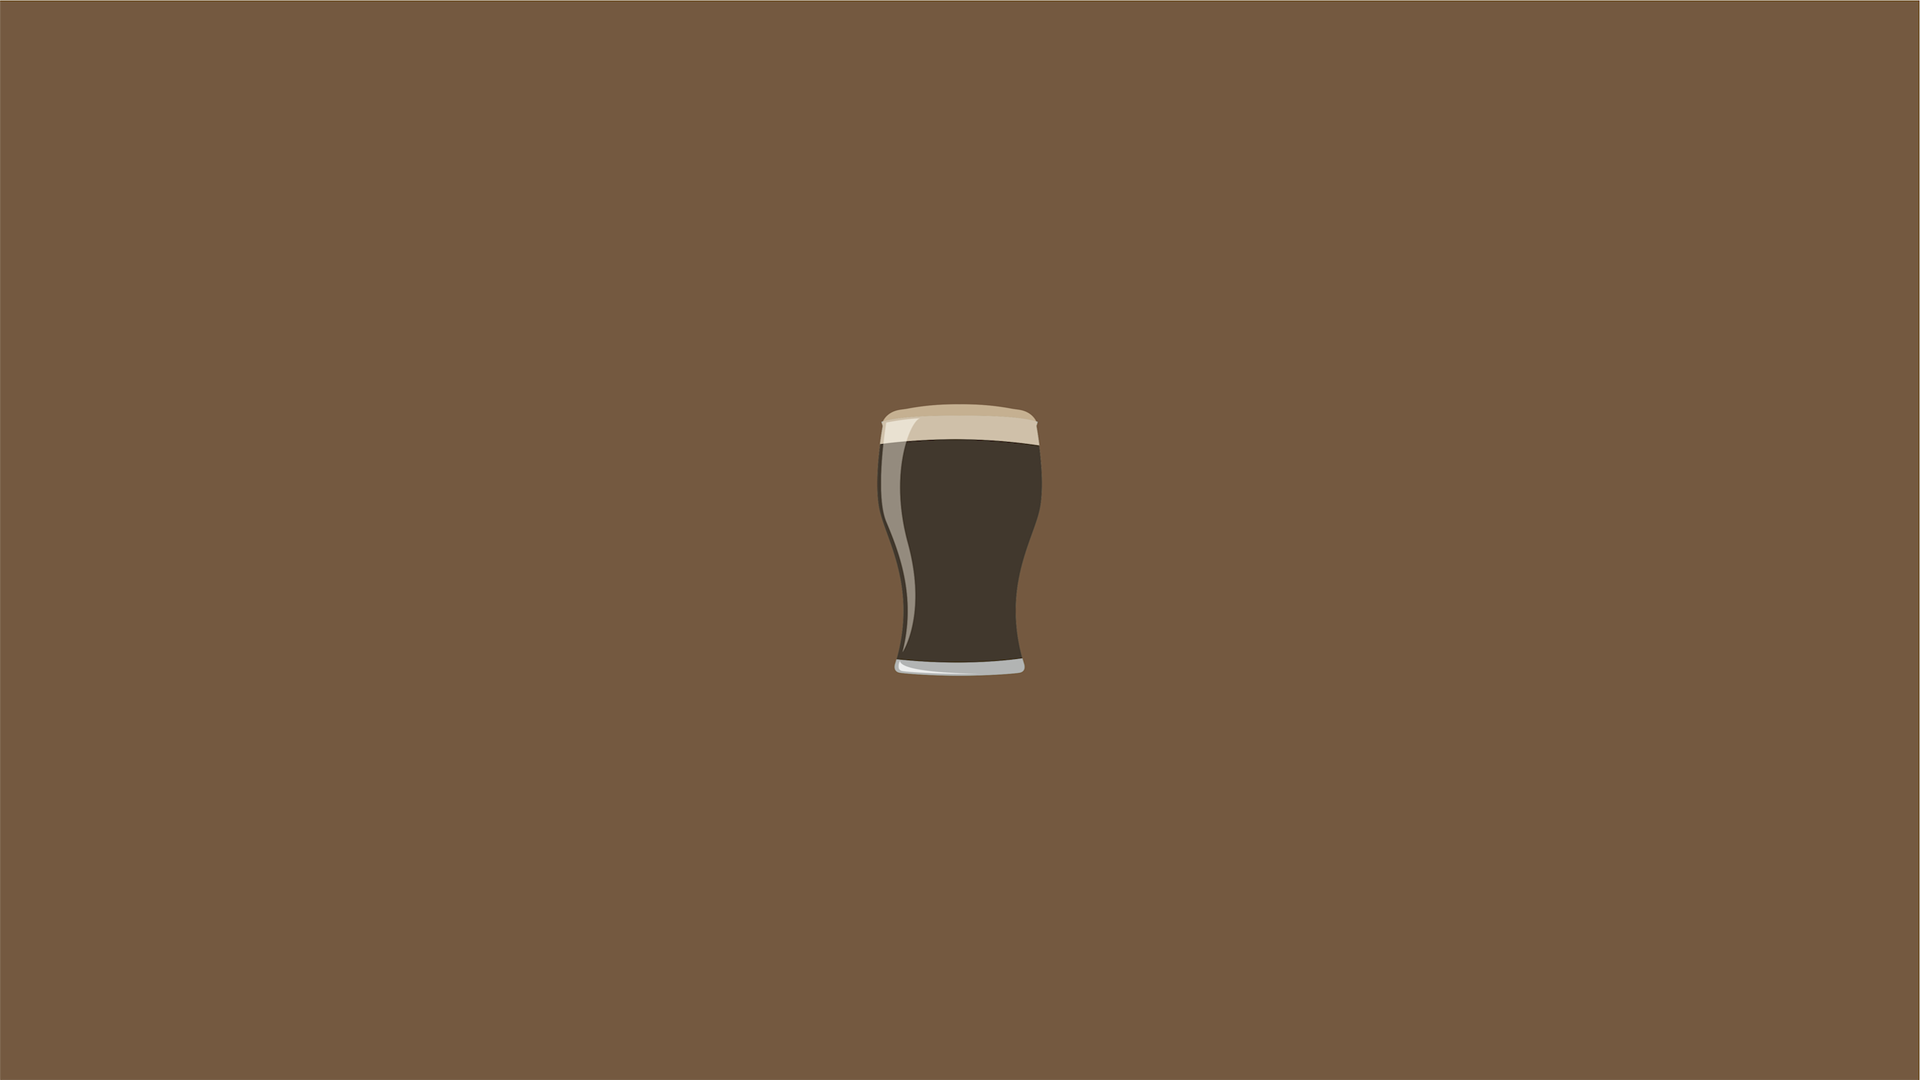 Products Guinness 1920x1080